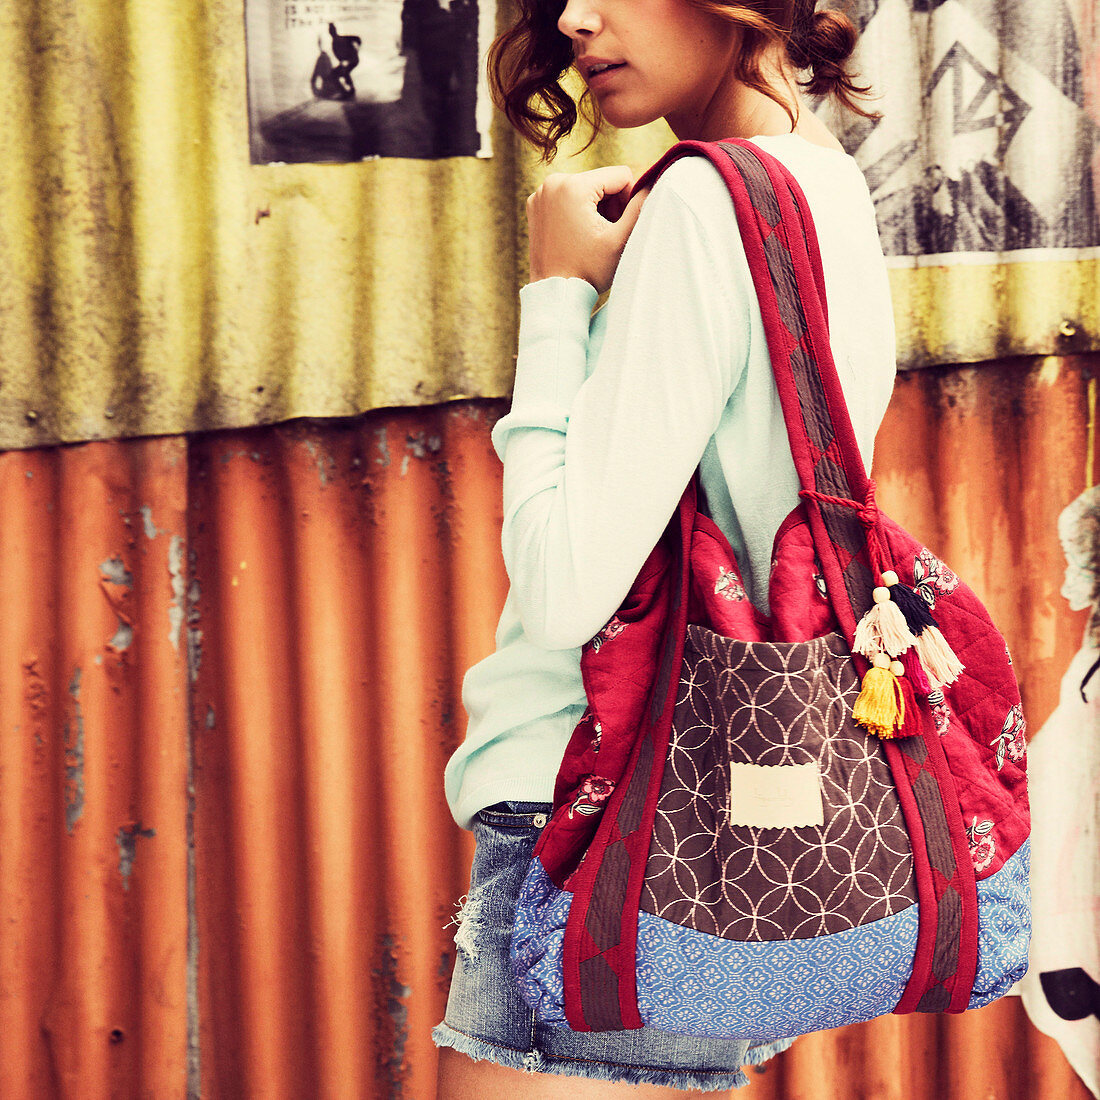 A young woman with a colourful bag